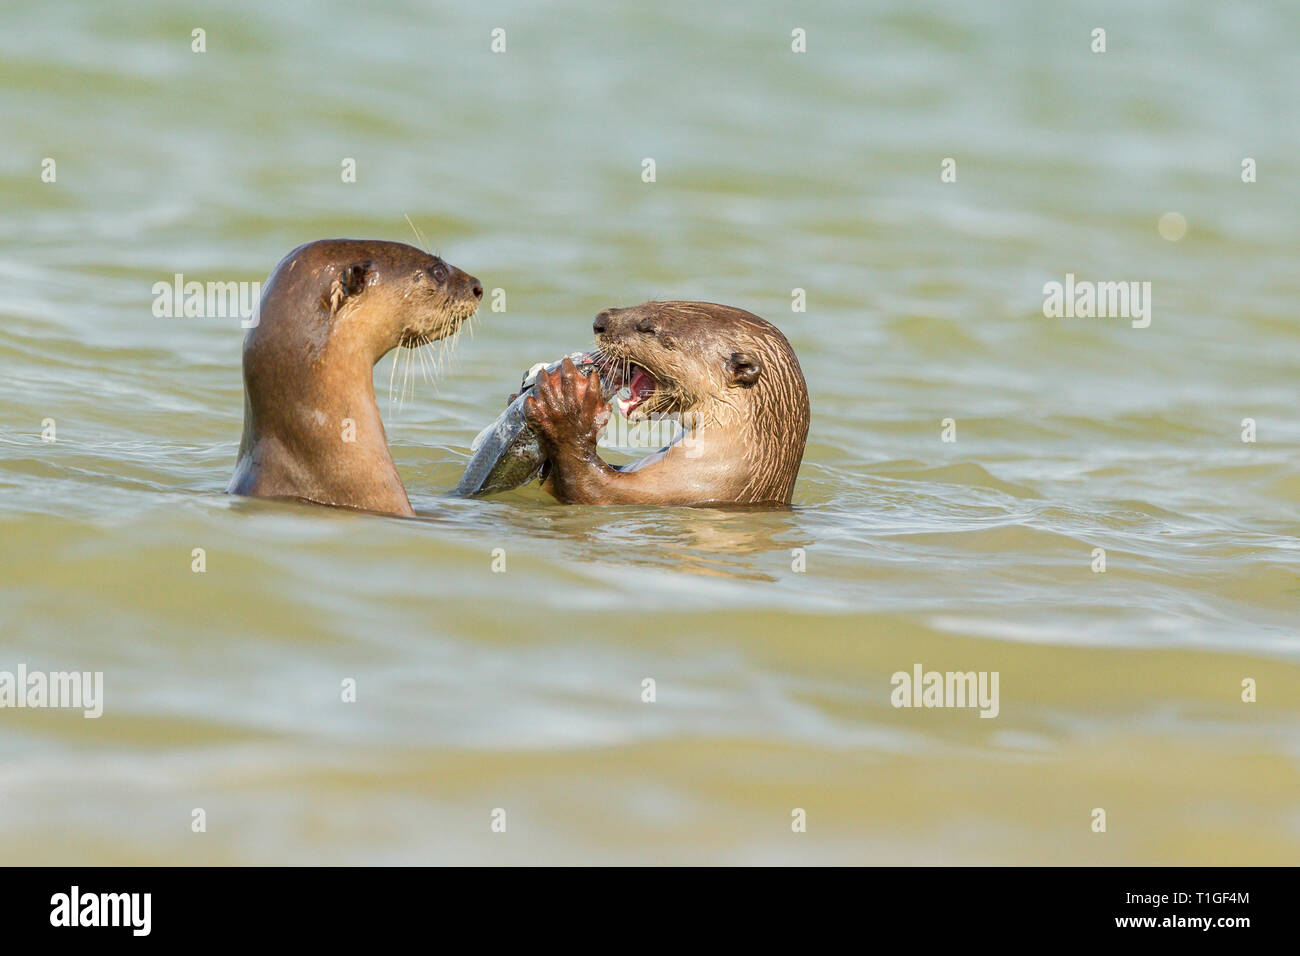 Smooth coated otter eating freshly caught fish from the sea in Singapore Stock Photo